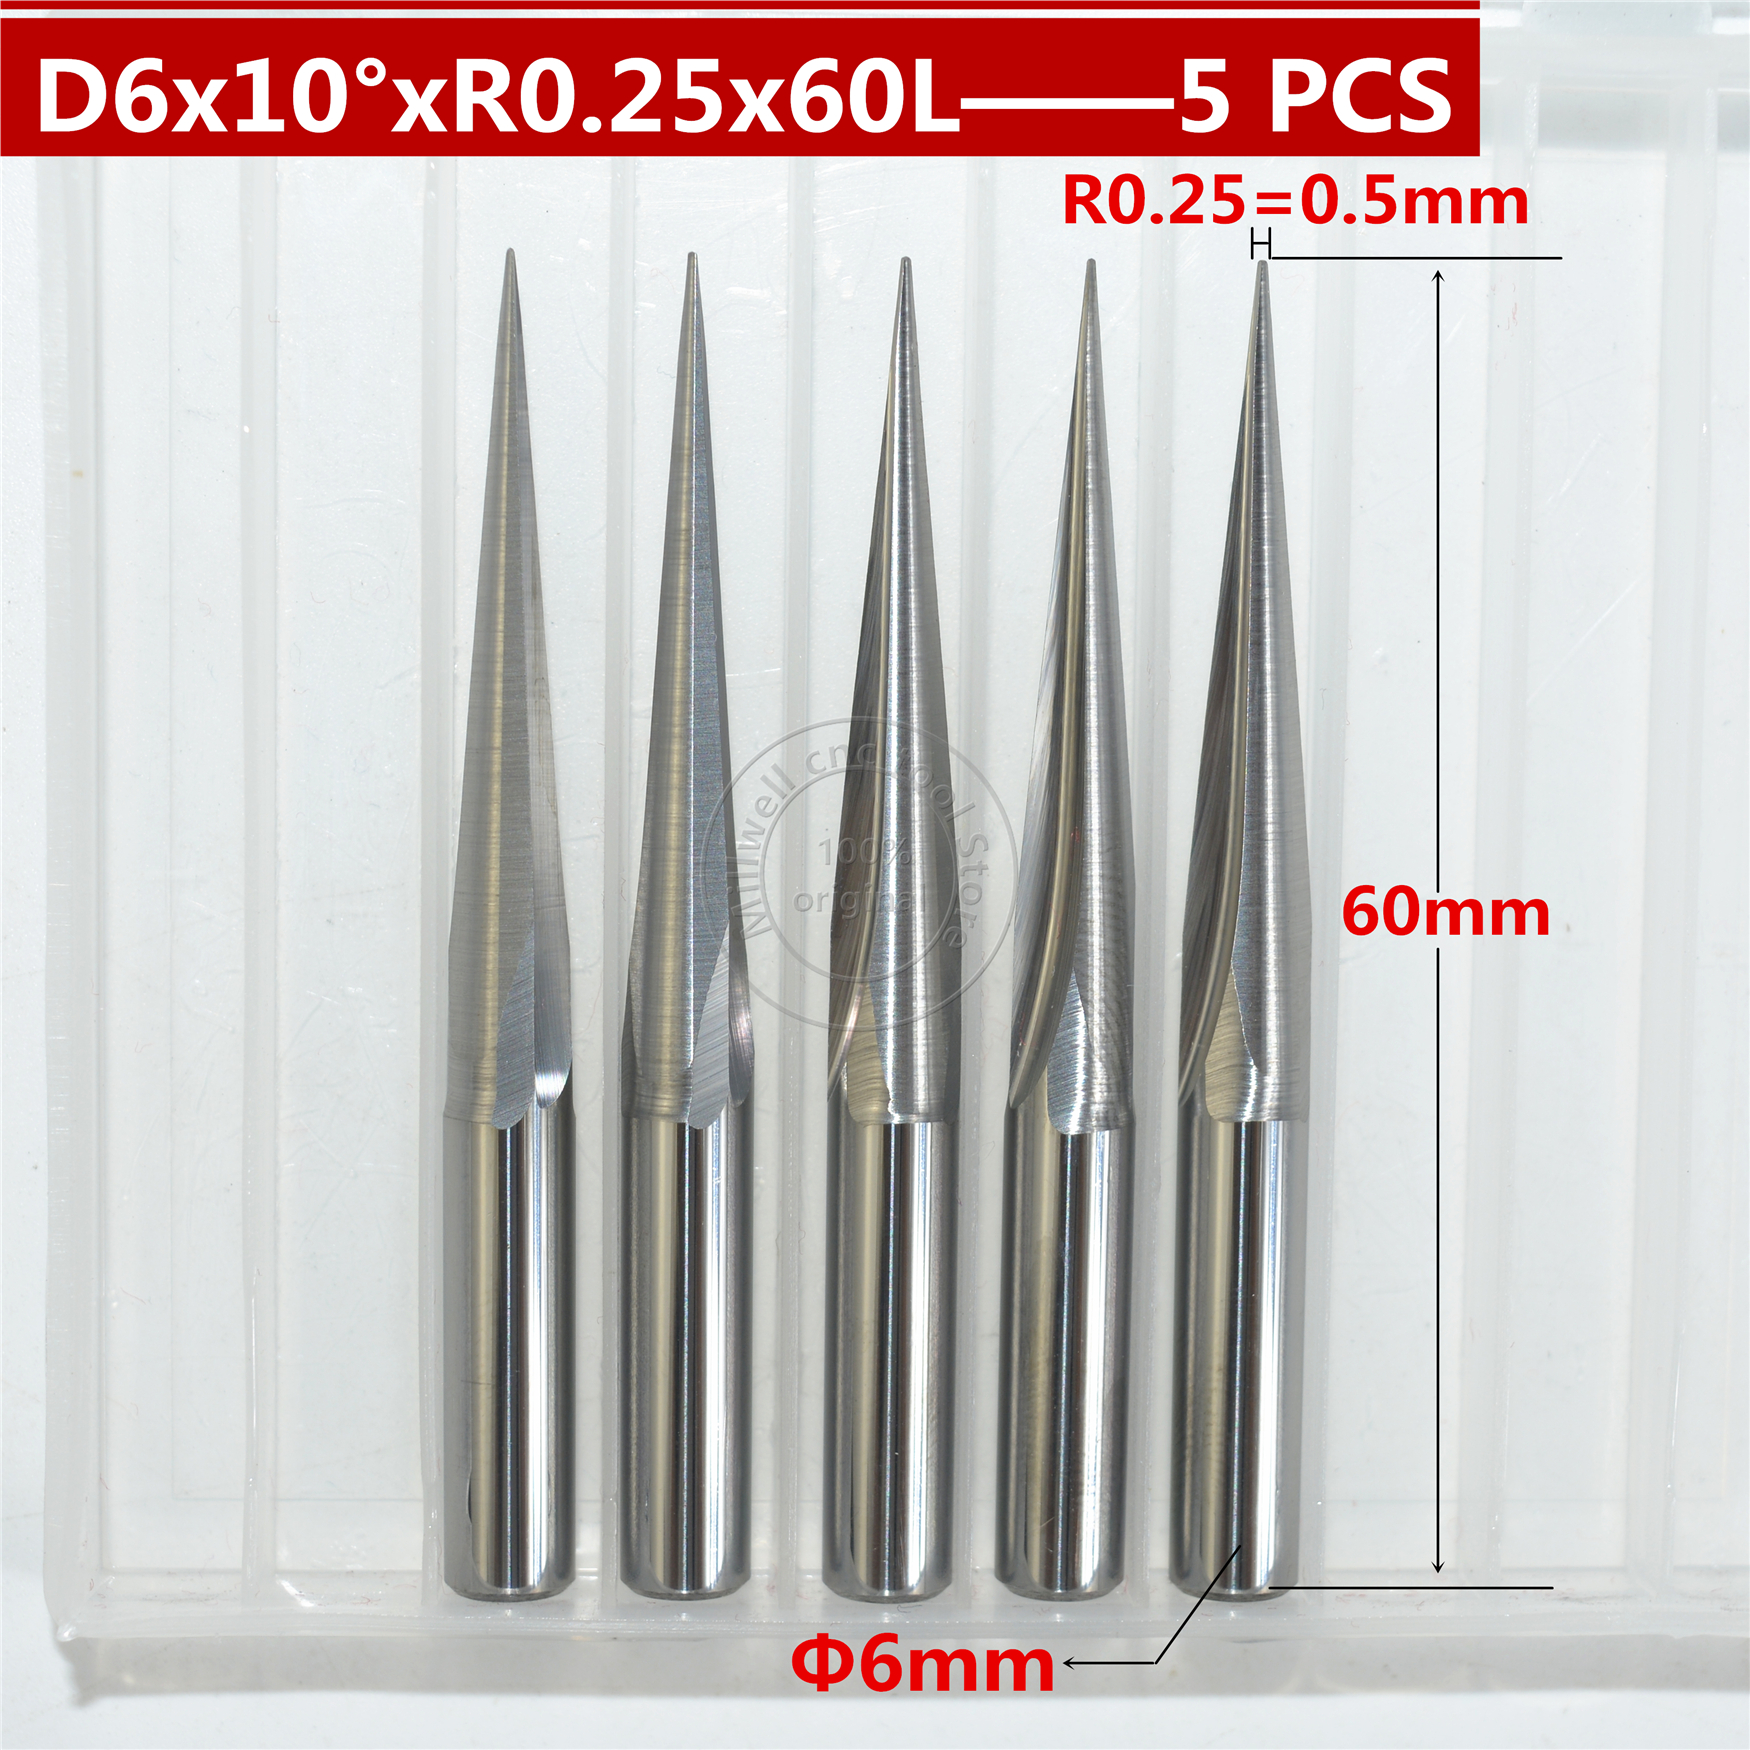 5 PCS 6mm*10degree*R0.25*60L,CNC carbide wood End Mill,woodworking insert  router bit,Taper ball nose end milling cutter - Price history  Review |  AliExpress Seller - Millwell cnc tool Store | Alitools.io